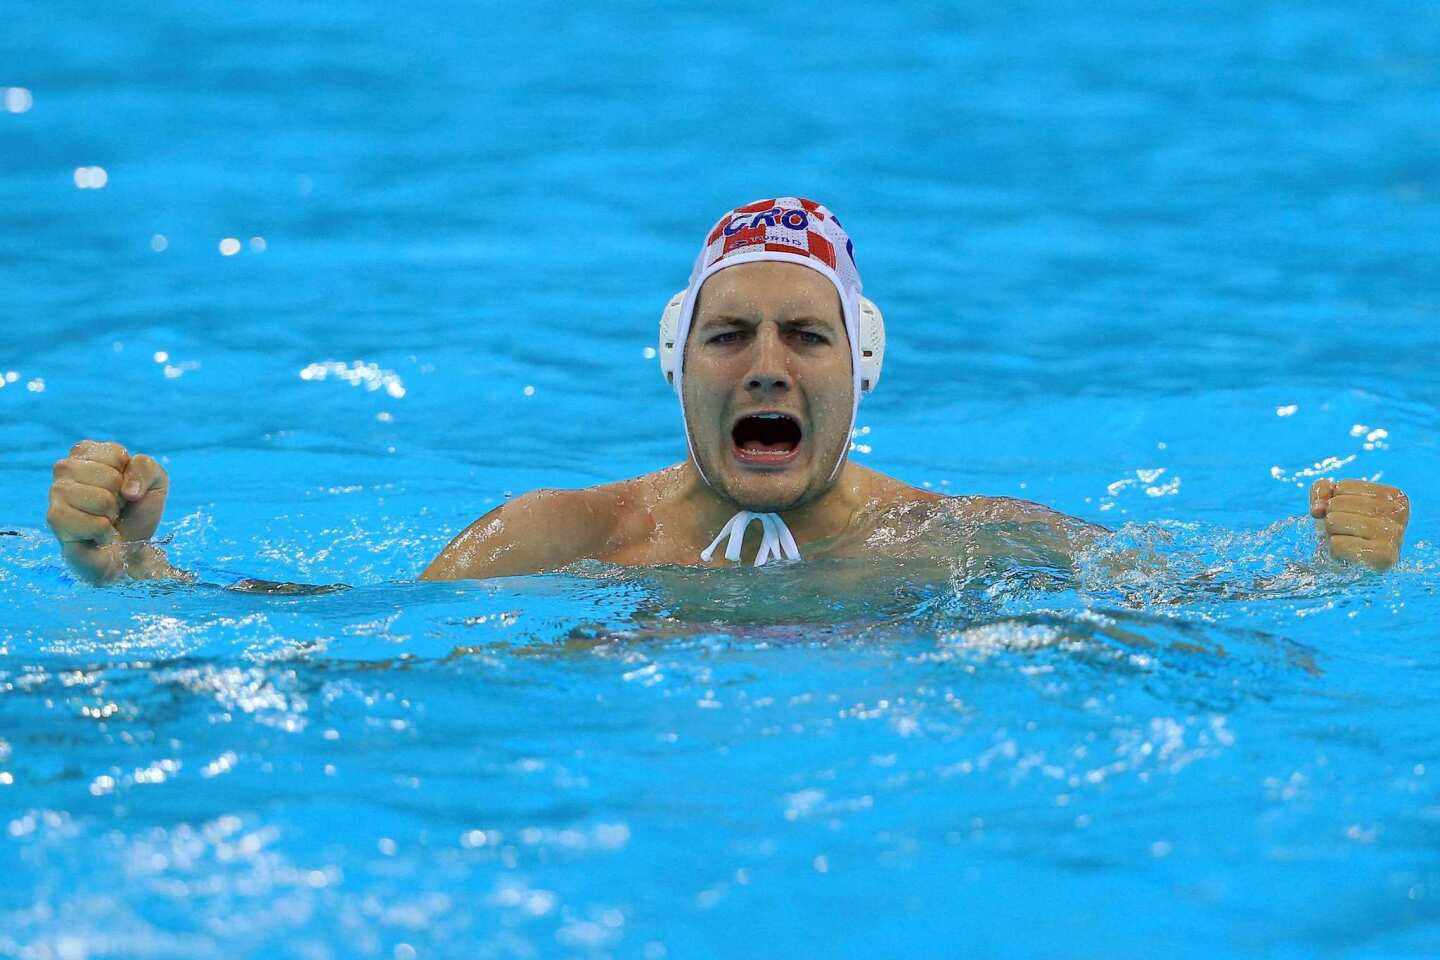 Andro Buslje of Croatia celebrates winning the men's water polo quarterfinal match against the United States.